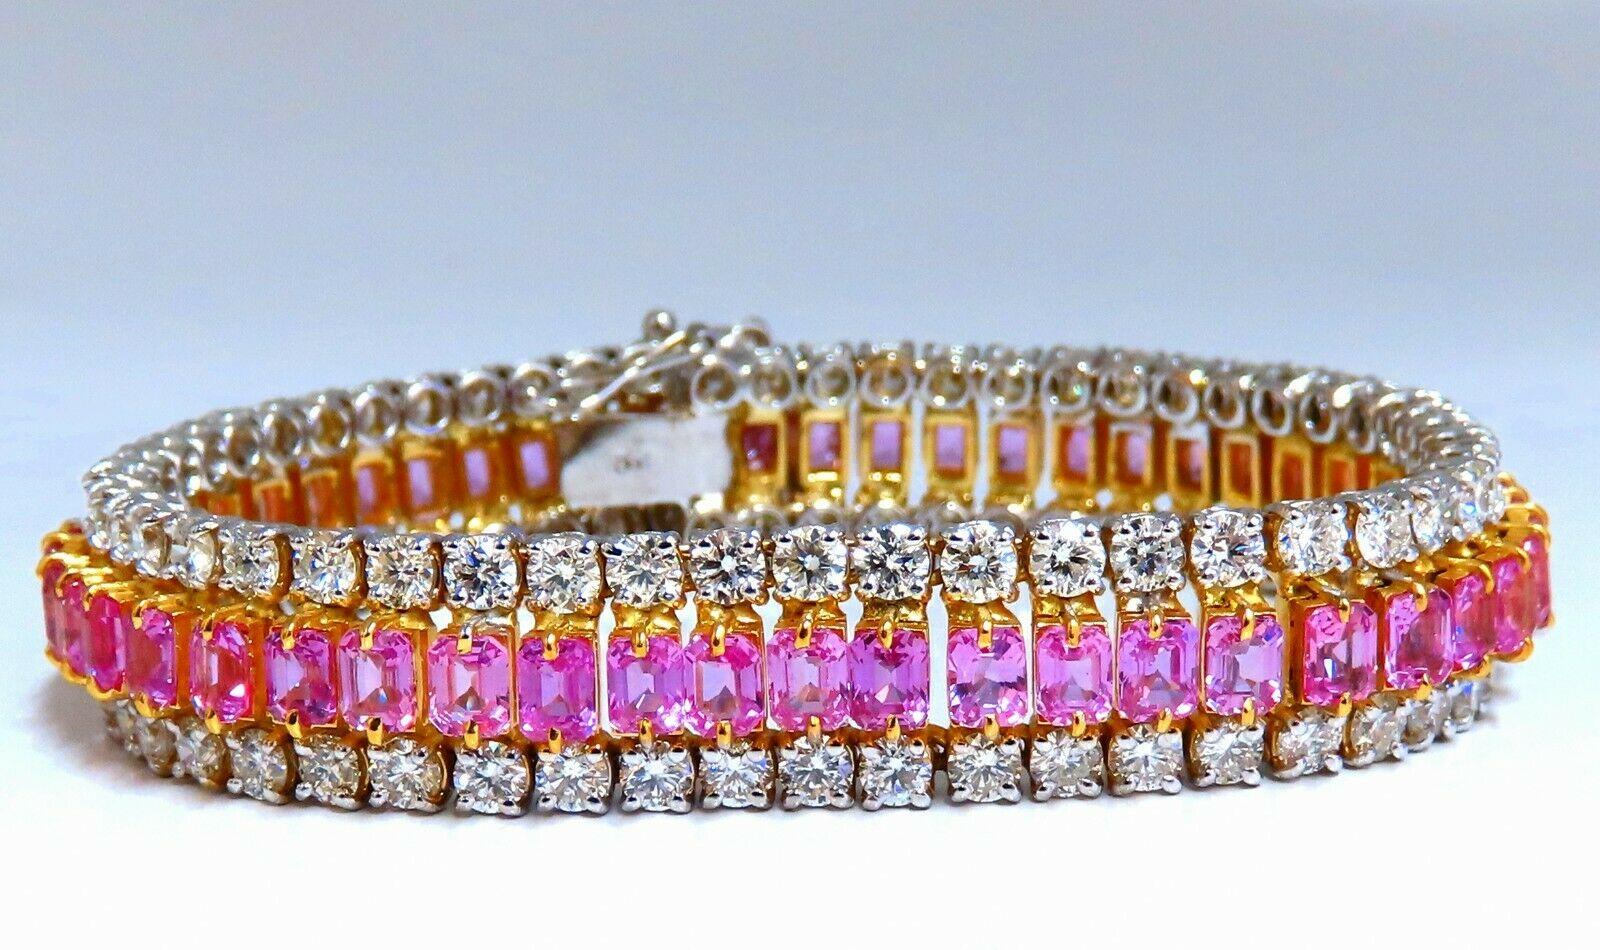 Three Tiered Magnificent.

16.33ct Natural Pink Sapphires bracelet.

Emerald cut, Clean Clarity & Transparent. 

Vivid Pinks and Prime Saturation.

Average each: 4.5 x 3.2mm

54 count

11ct Natural Diamonds.

Full Round cuts, great sparkle.

F/